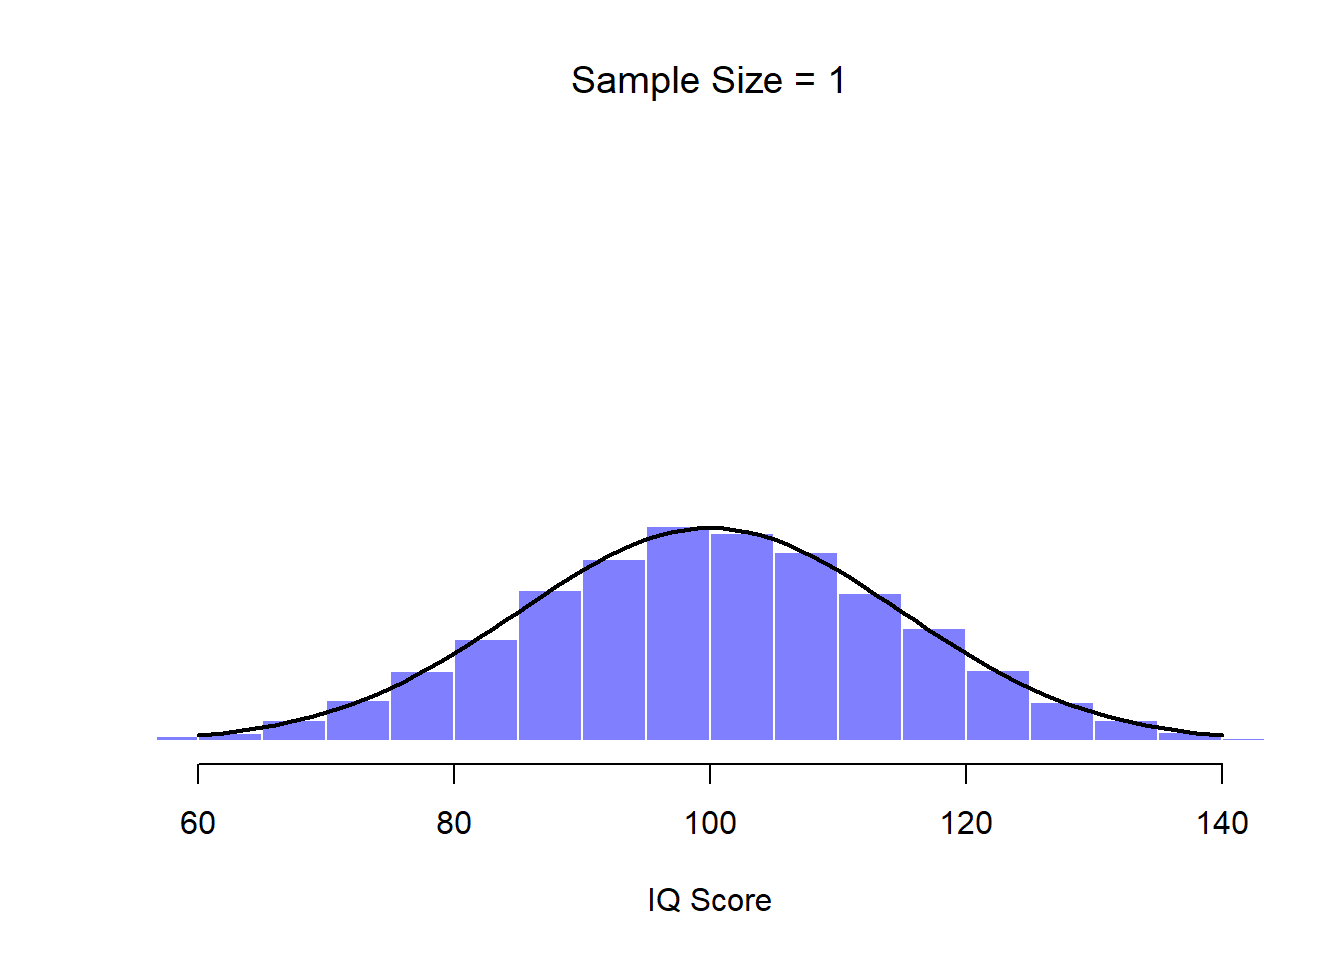 Each data set contained only a single observation, so the mean of each sample is just one person's IQ score. As a consequence, the sampling distribution of the mean is of course identical to the population distribution of IQ scores.